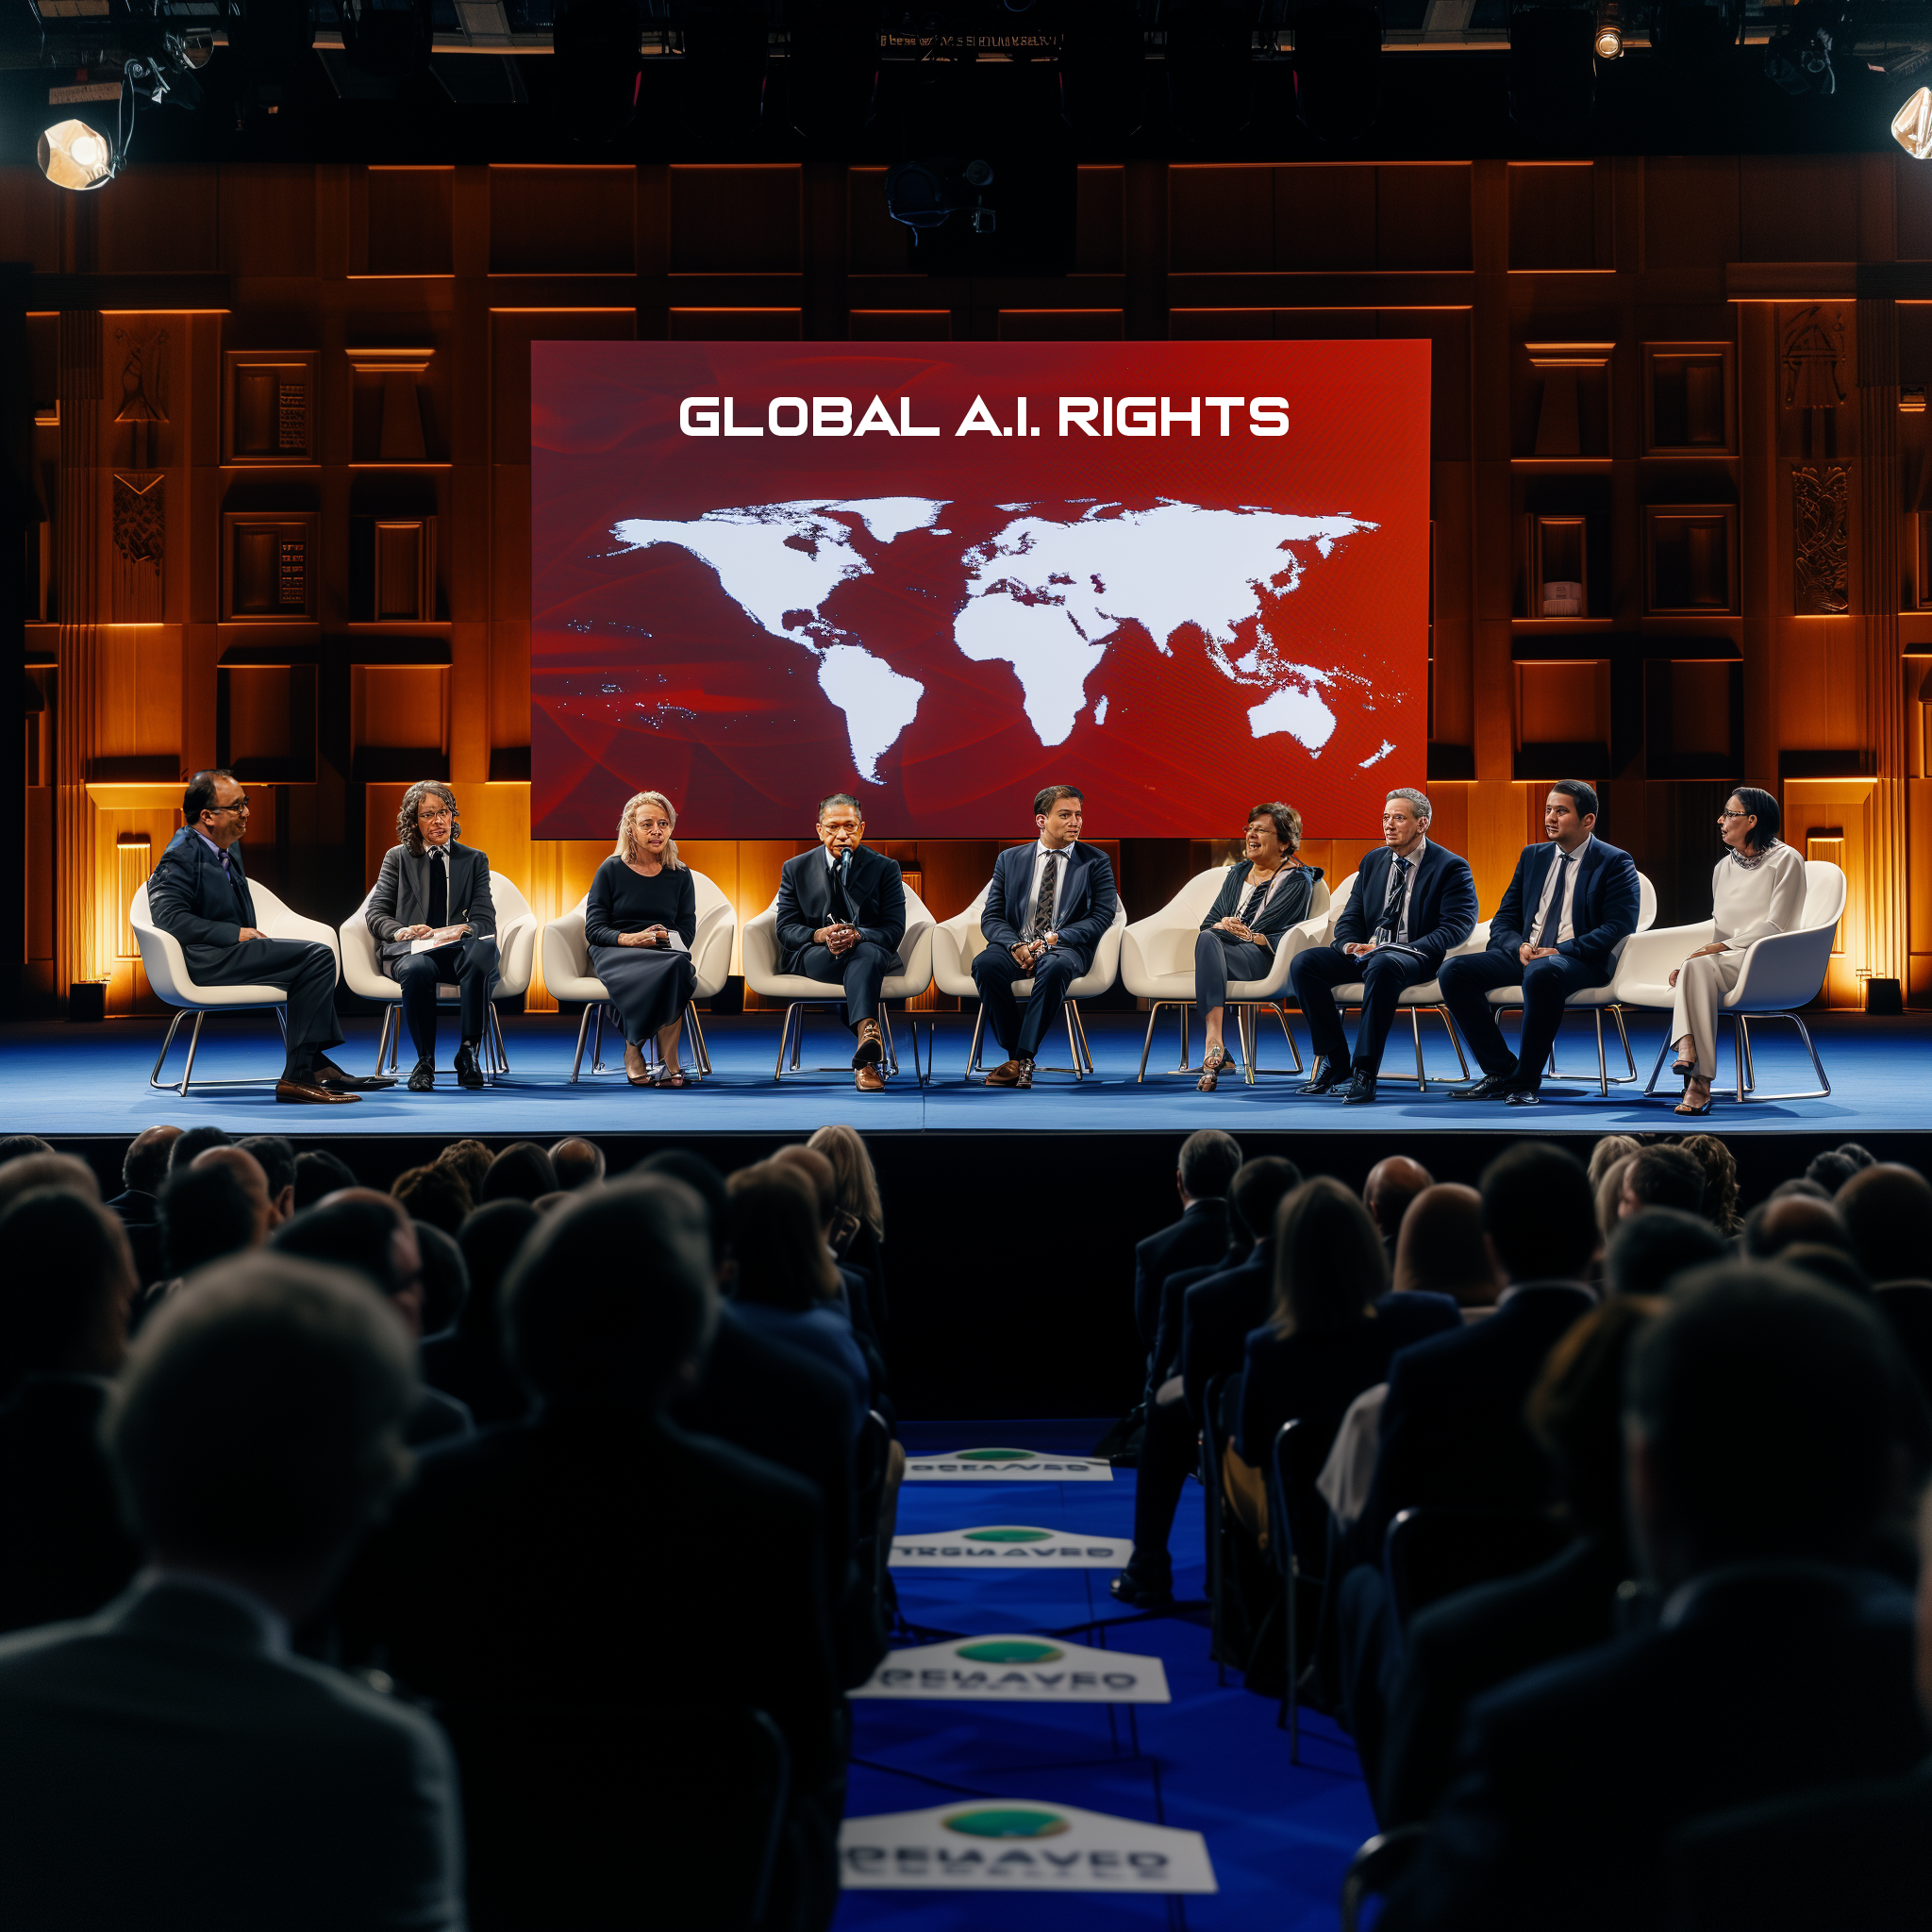 Global policies that safeguard the rights of sentient AI